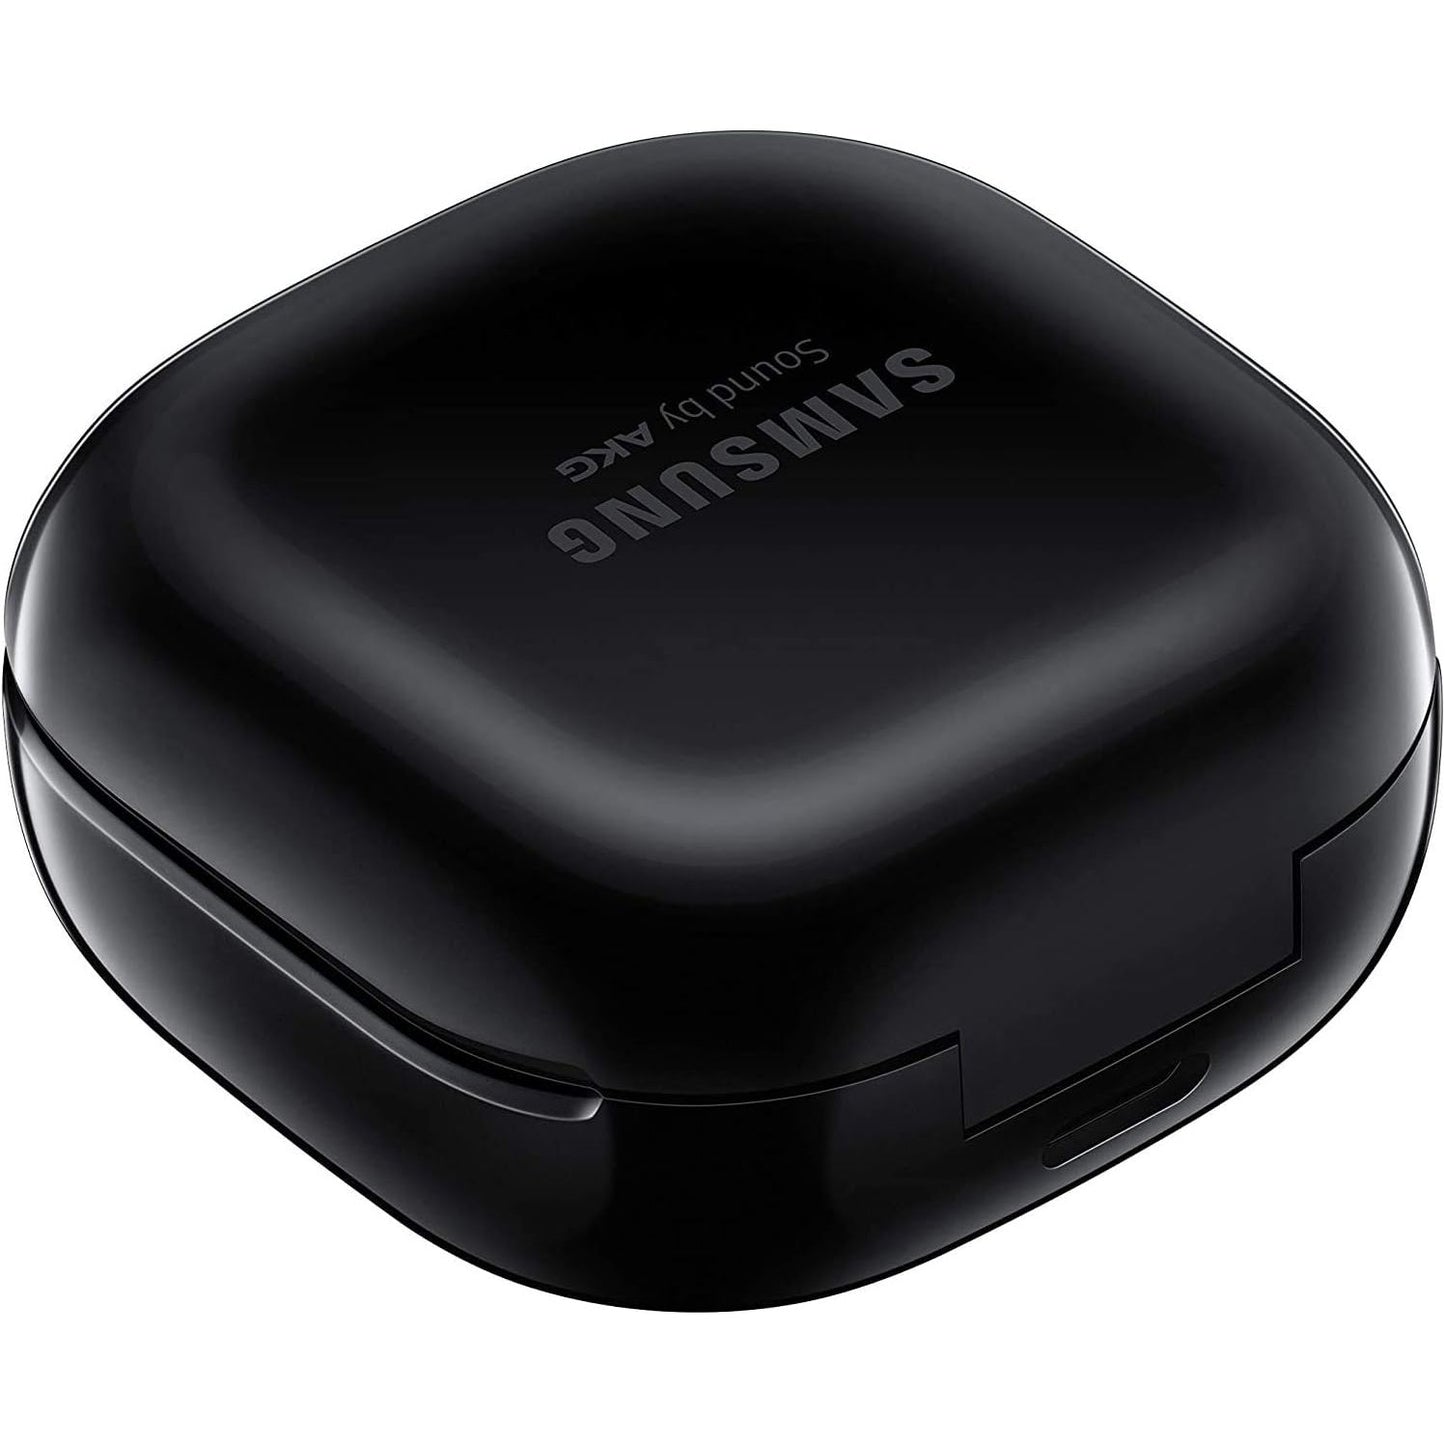 Samsung Galaxy Buds Live, Wireless Bluetooth Headphones with Noise Canceling (ANC), Comfortable Fit, Long Lasting Battery, Wireless Headphones in Mystic Black 